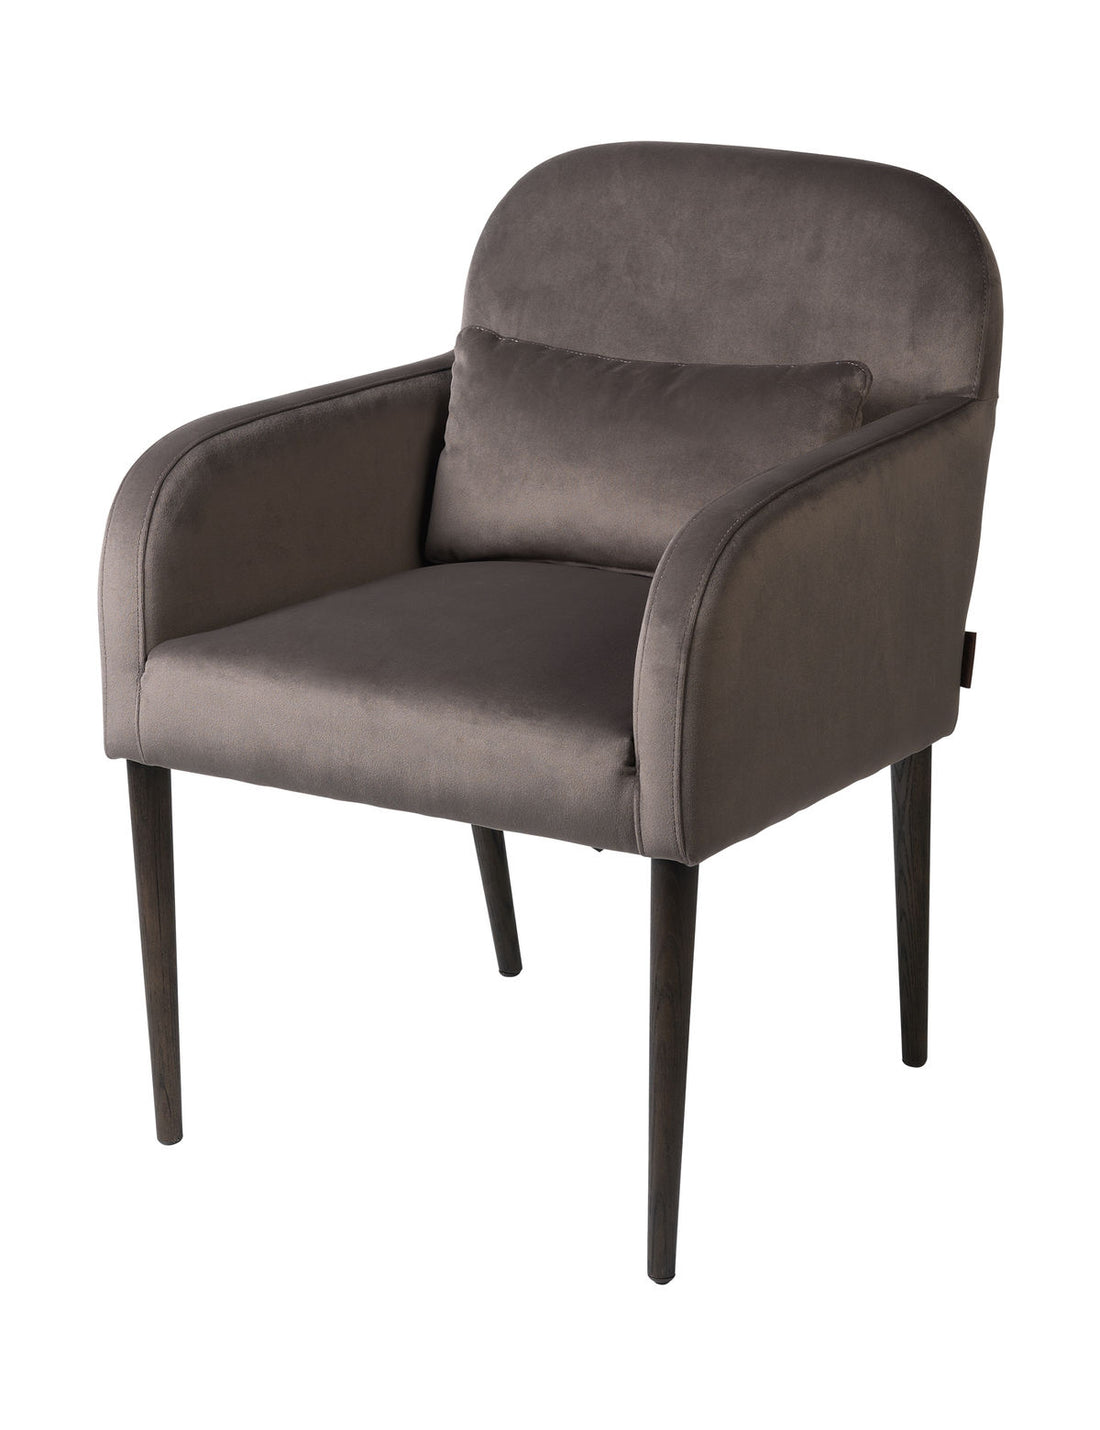 Cozy Living Gotland Dining Chair - TAUPE